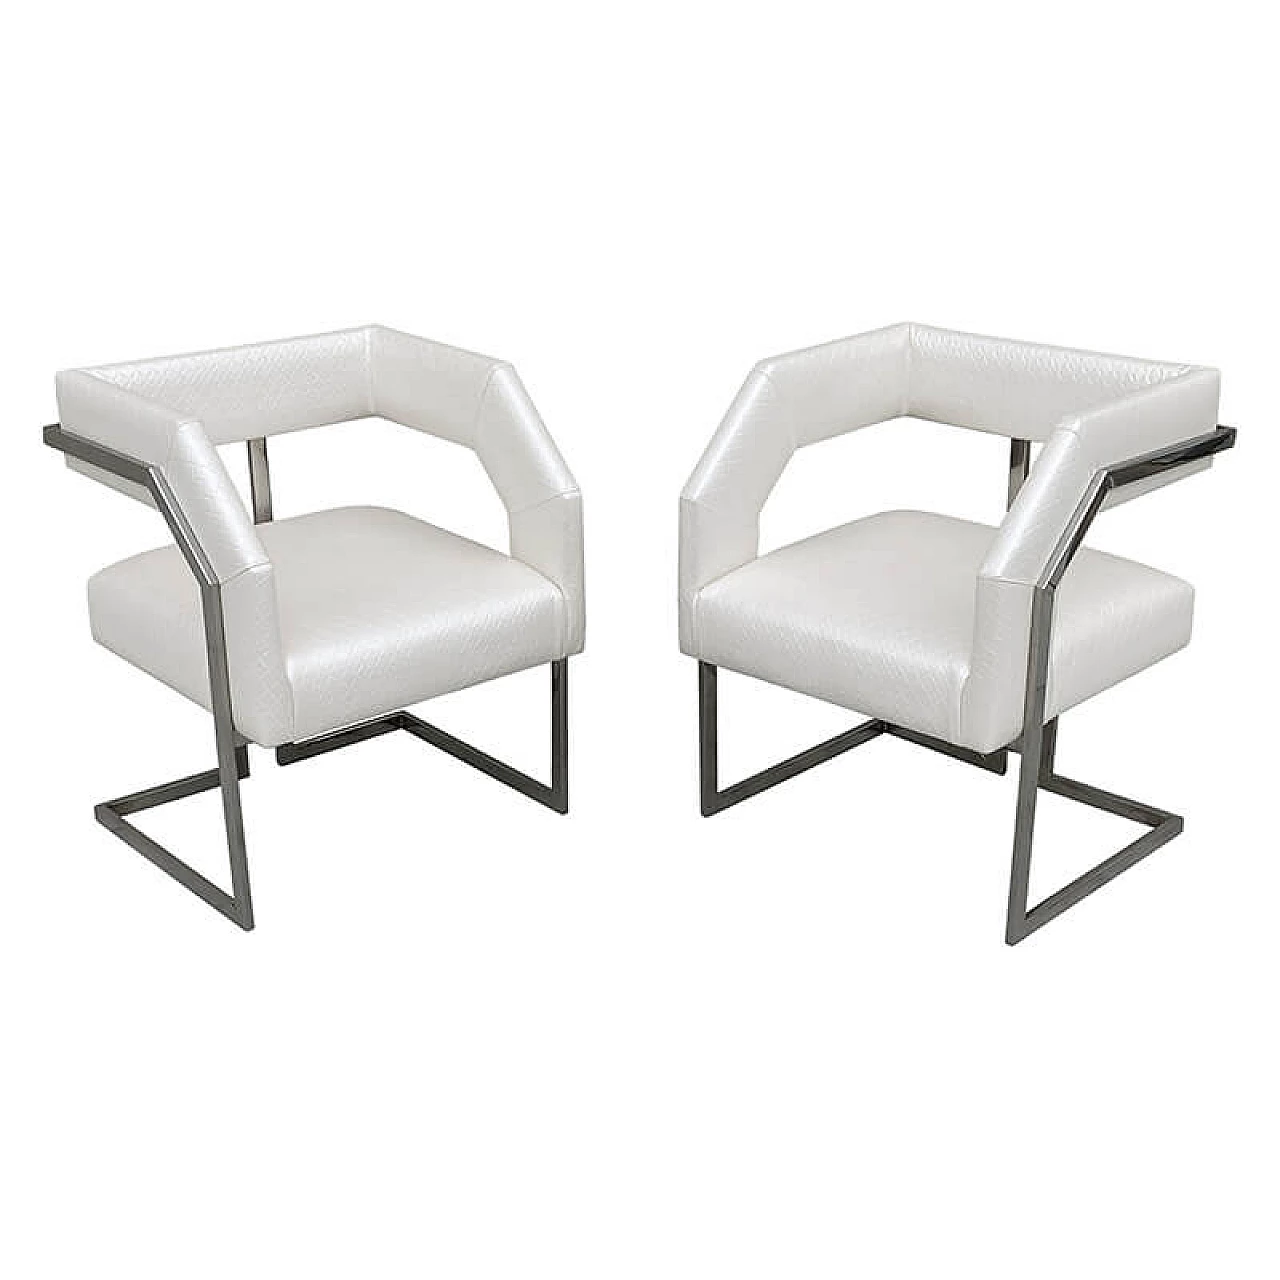 Pair of white faux leather chairs with chrome-plated steel frame, 1990s 1